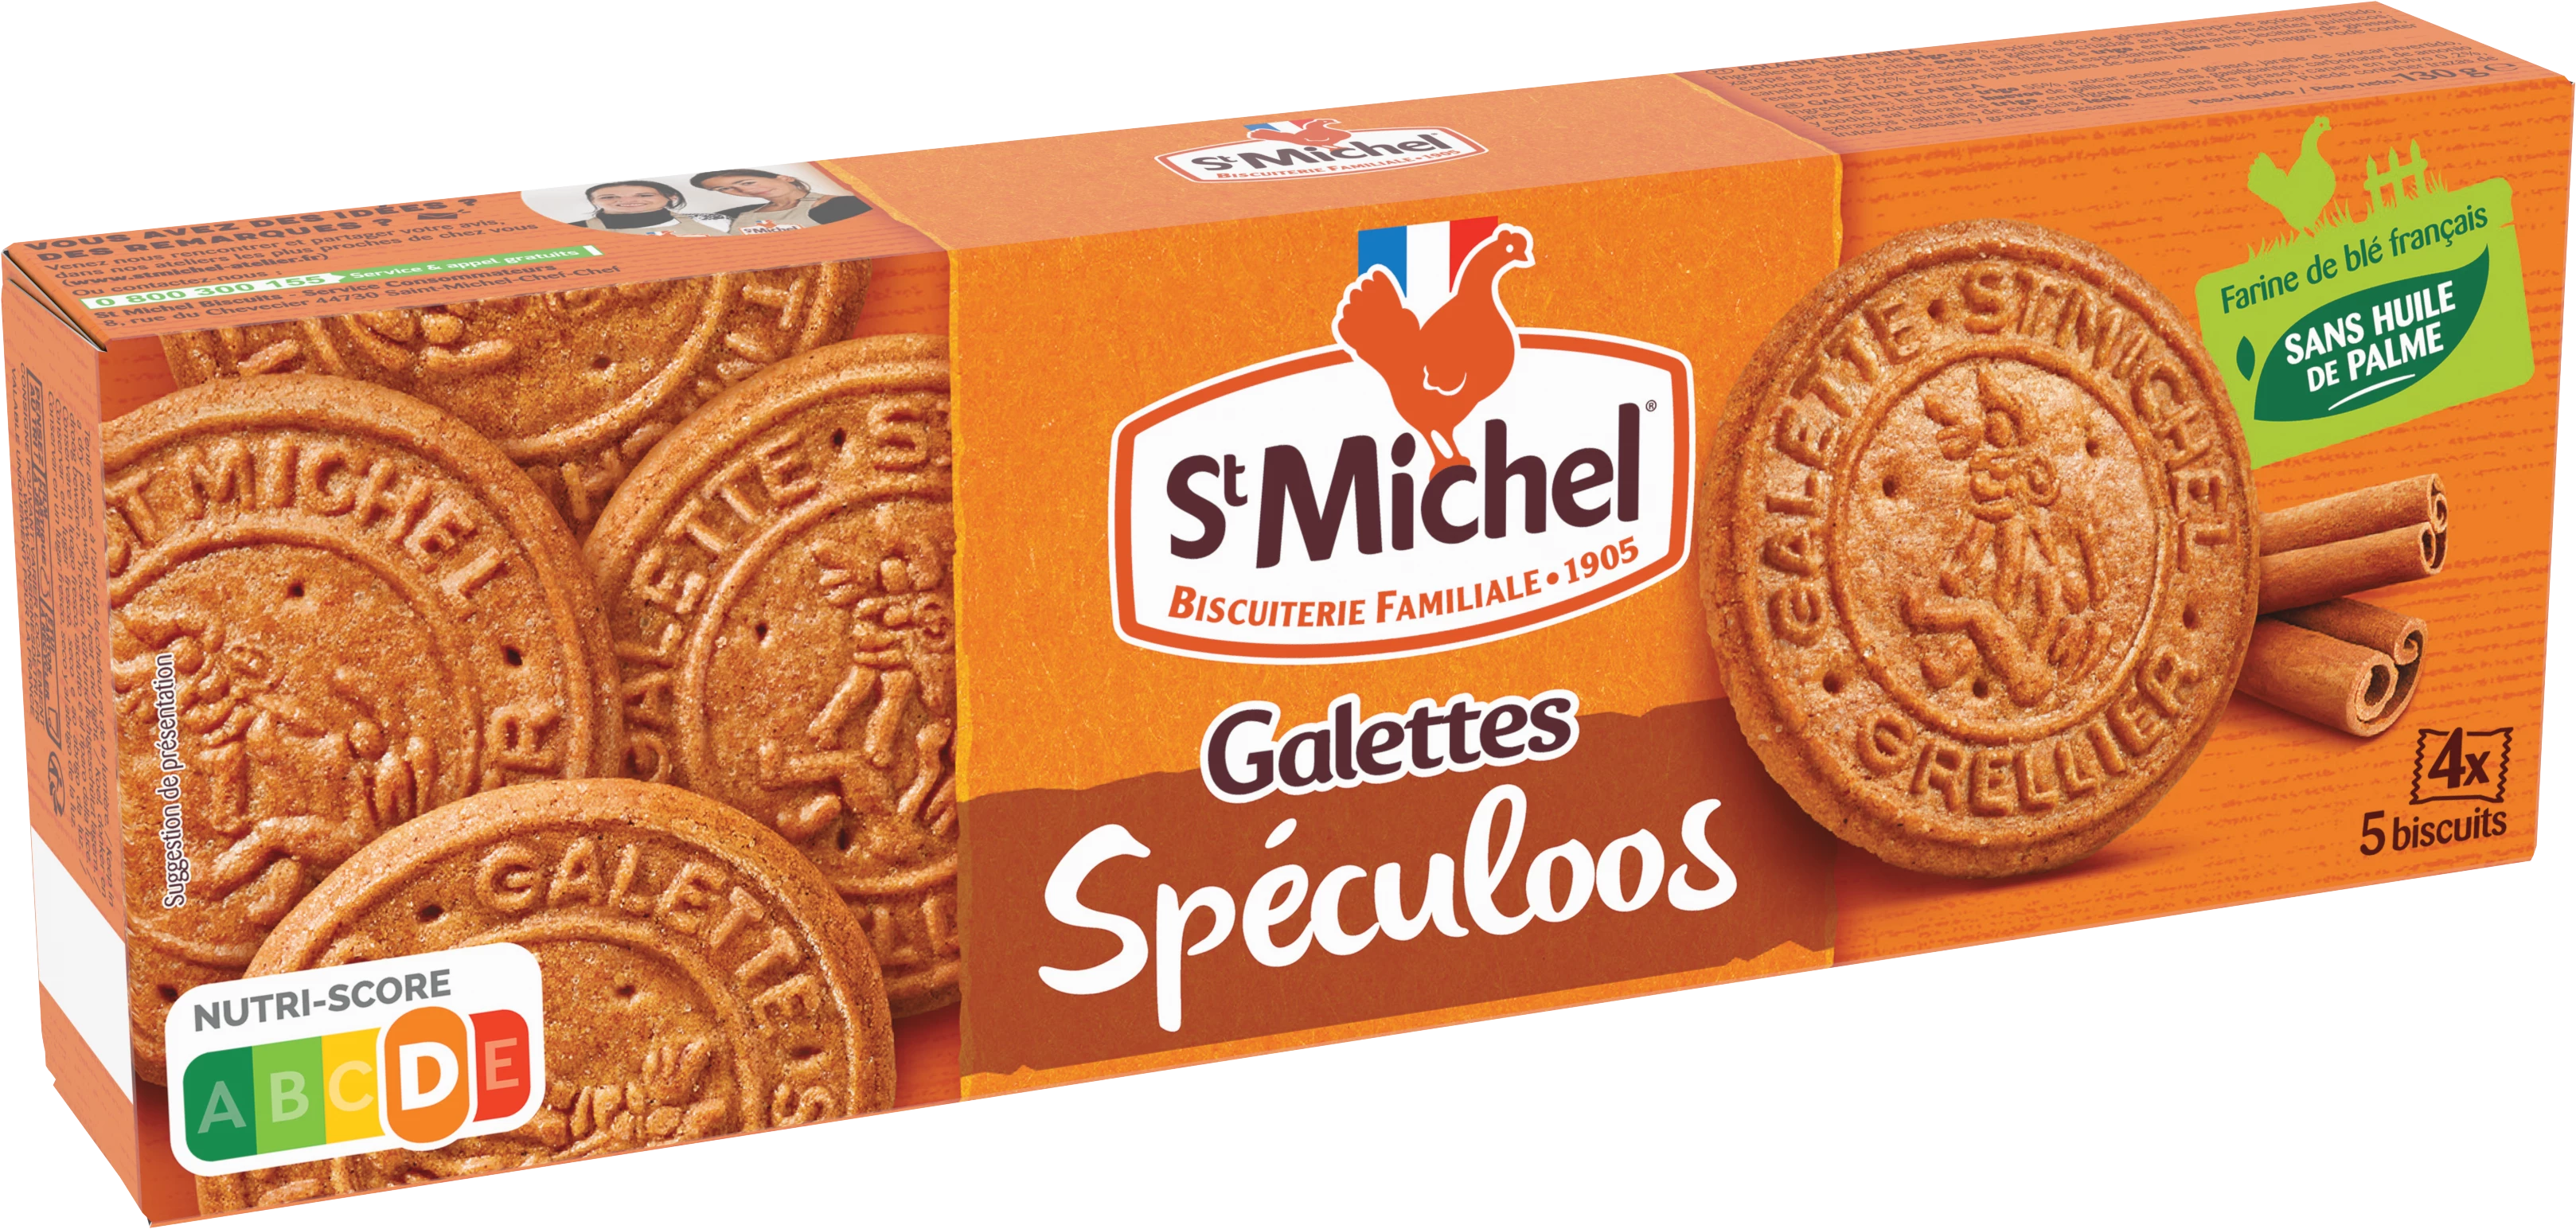 Galettes Speculoos 130g - ST MICHEL